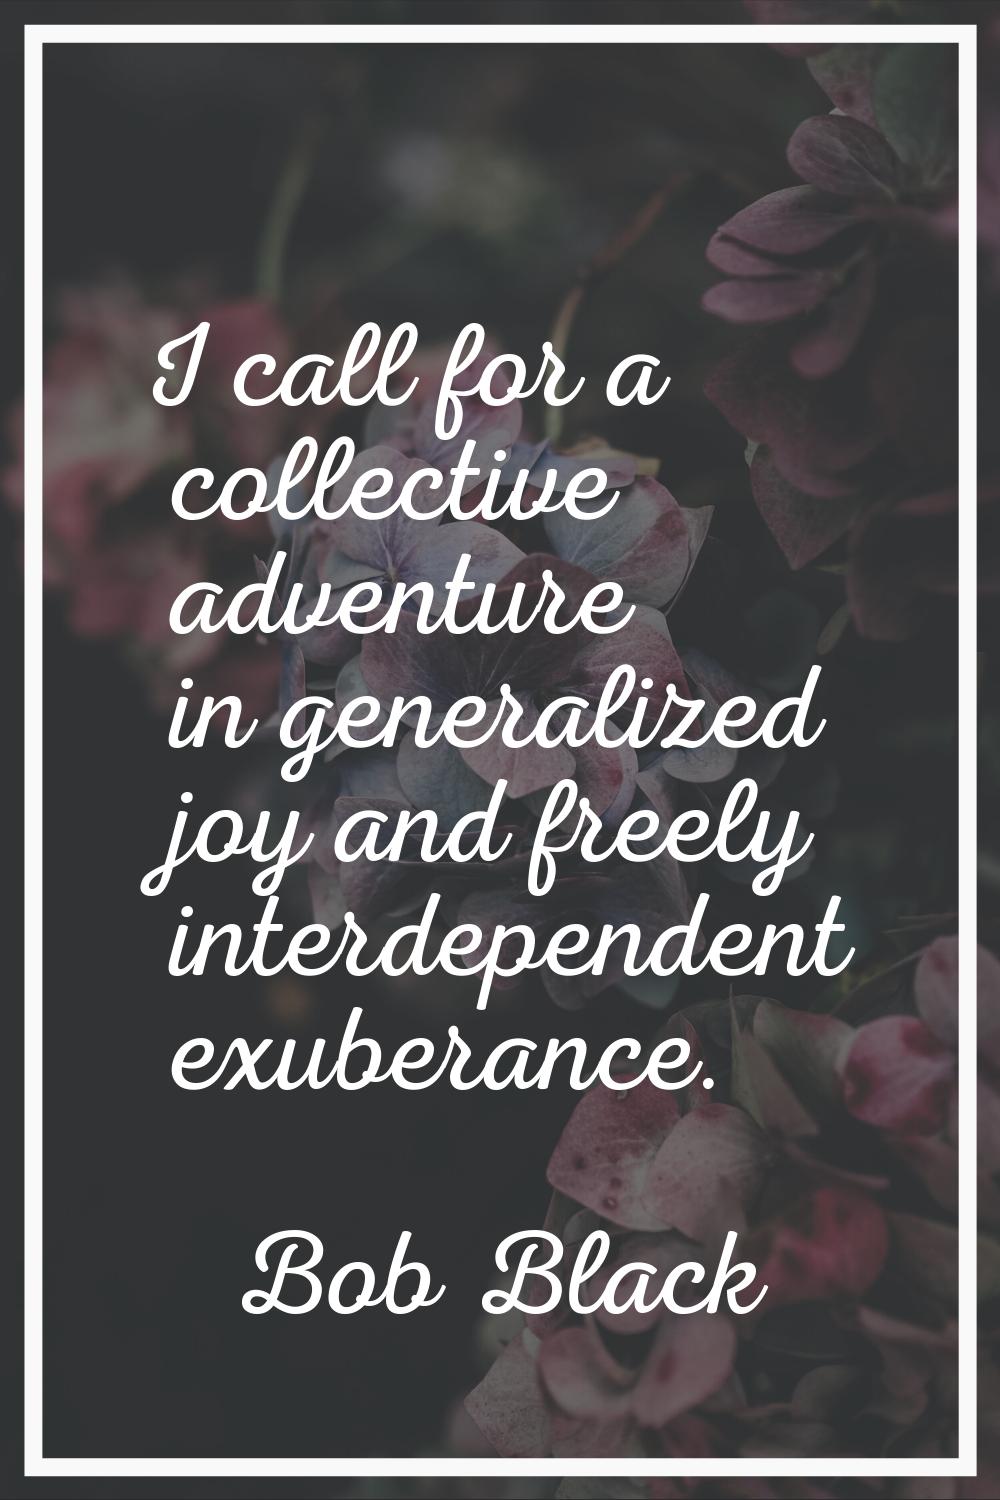 I call for a collective adventure in generalized joy and freely interdependent exuberance.